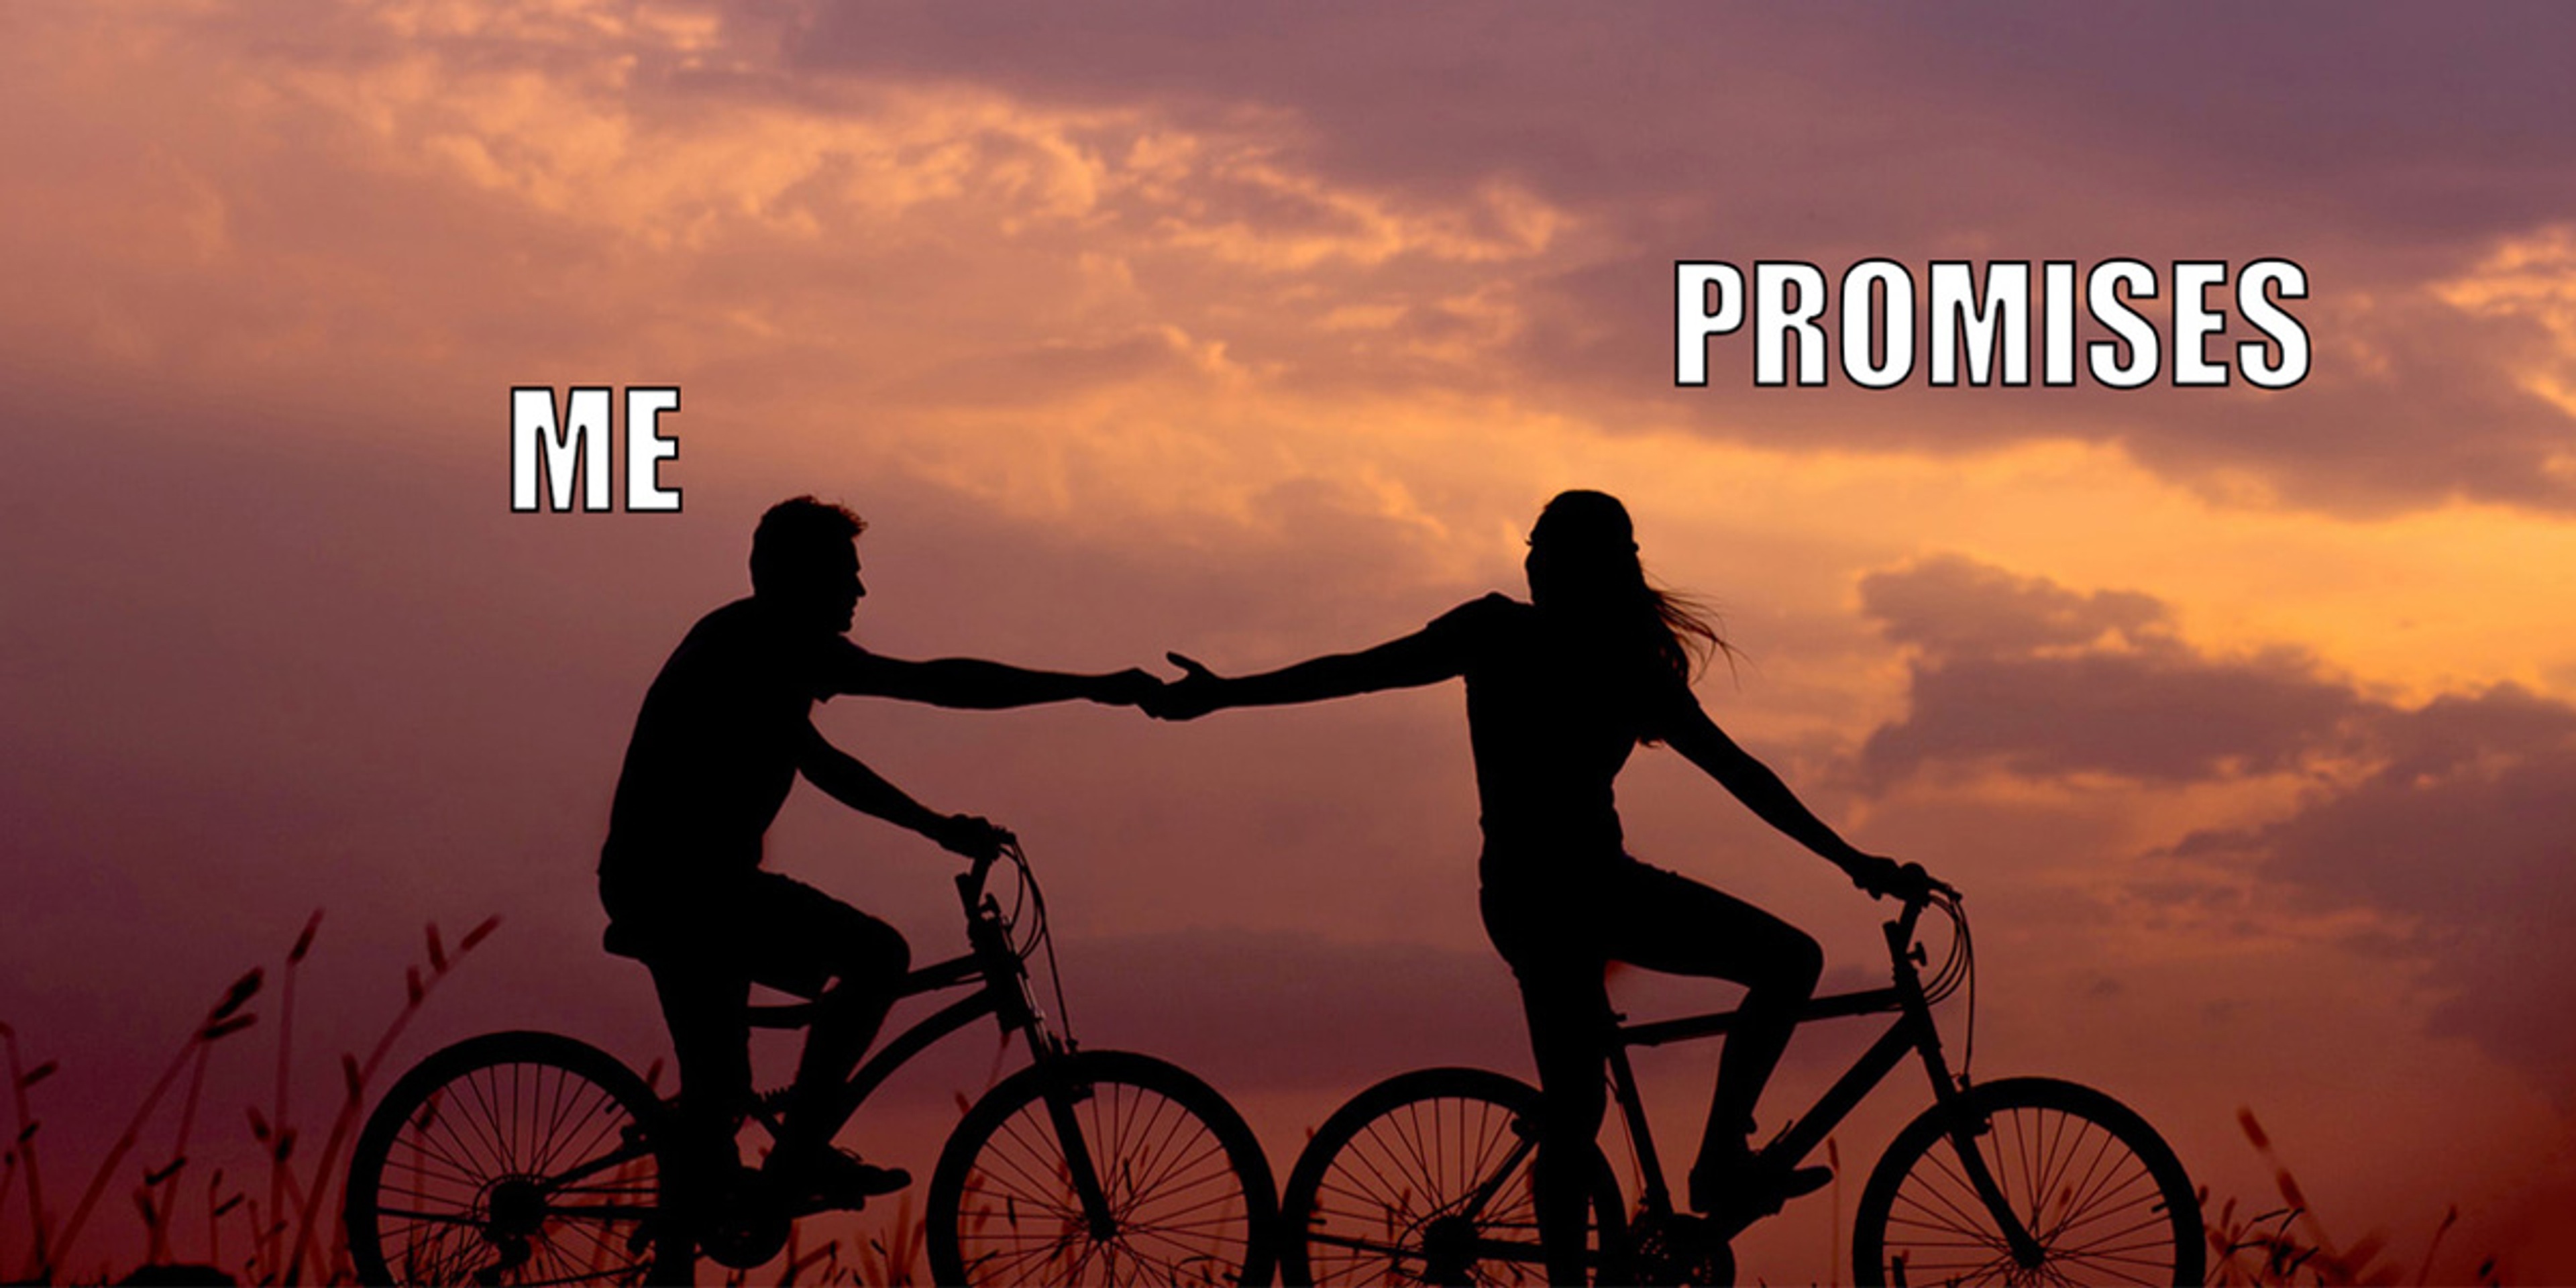 two people riding a bike, holding hands making promises